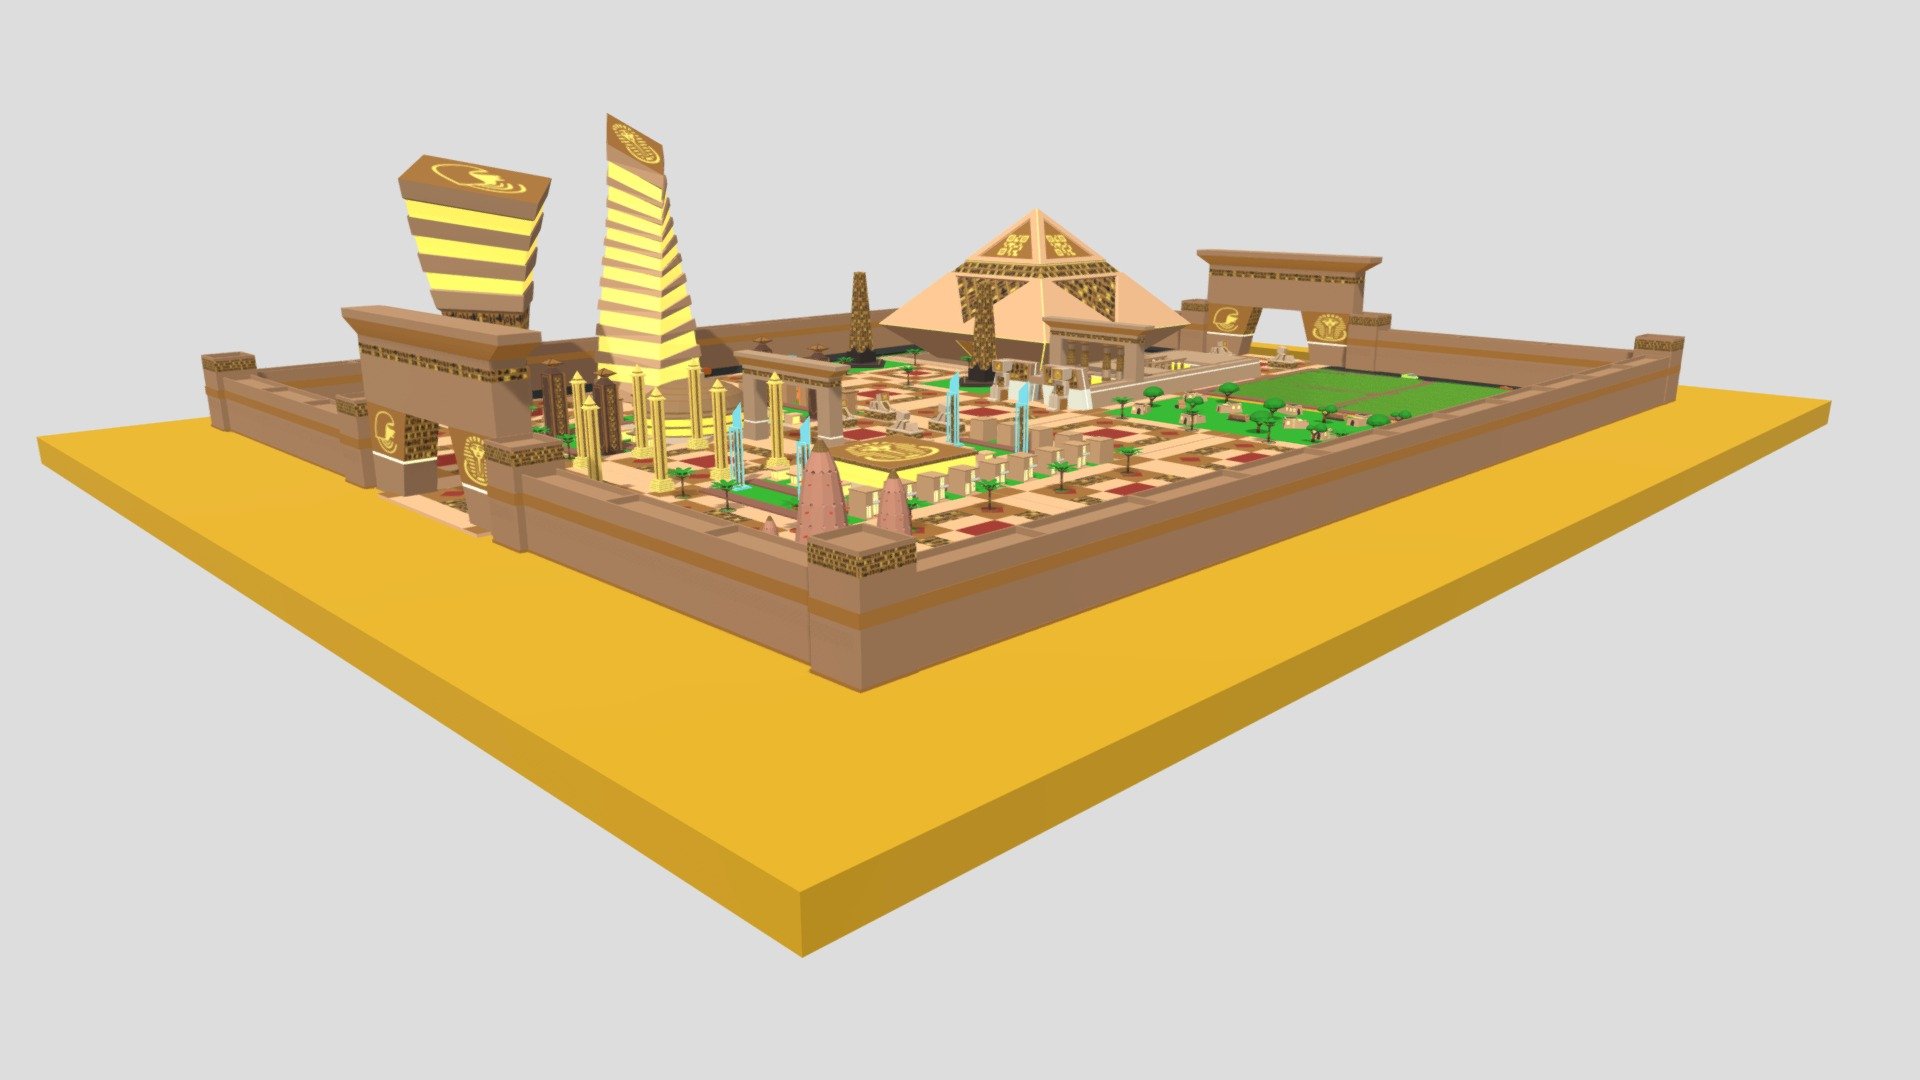 Introducing the Futuristic City of Thebes, a captivating low poly game asset pack that brings ancient Egyptian architecture to the future. This stunning virtual world features a blend of modern and ancient elements, including pyramids, farms, houses, skyscrapers, obelisks, temples, and much more. The futuristic city of Thebes is perfect for a range of game development projects, architectural visualizations, and creative explorations. Whether you're building an epic adventure game, a futuristic cityscape, or a virtual tour of a futuristic world, this game asset pack will help bring your project to life 3d model